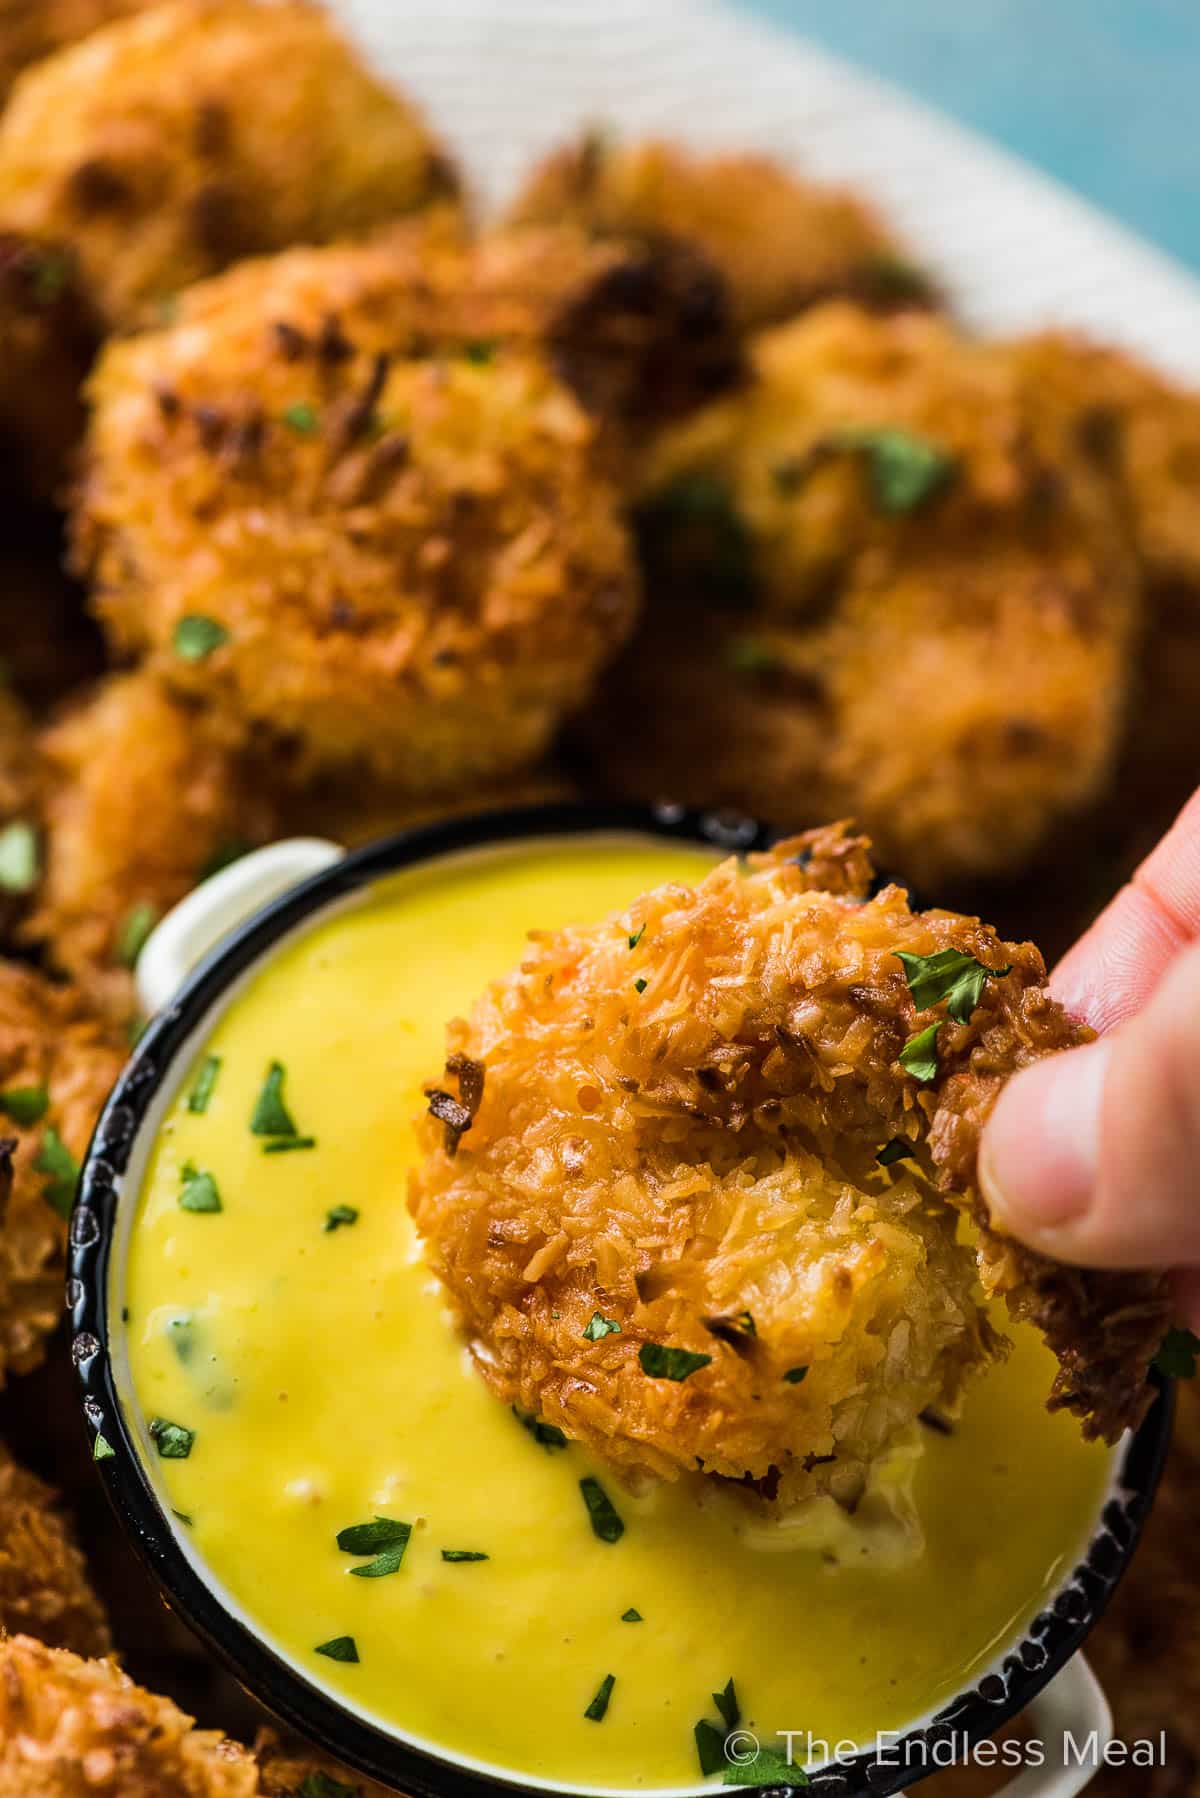 A hand dipping a coconut shrimp into a bowl of mango dipping sauce.